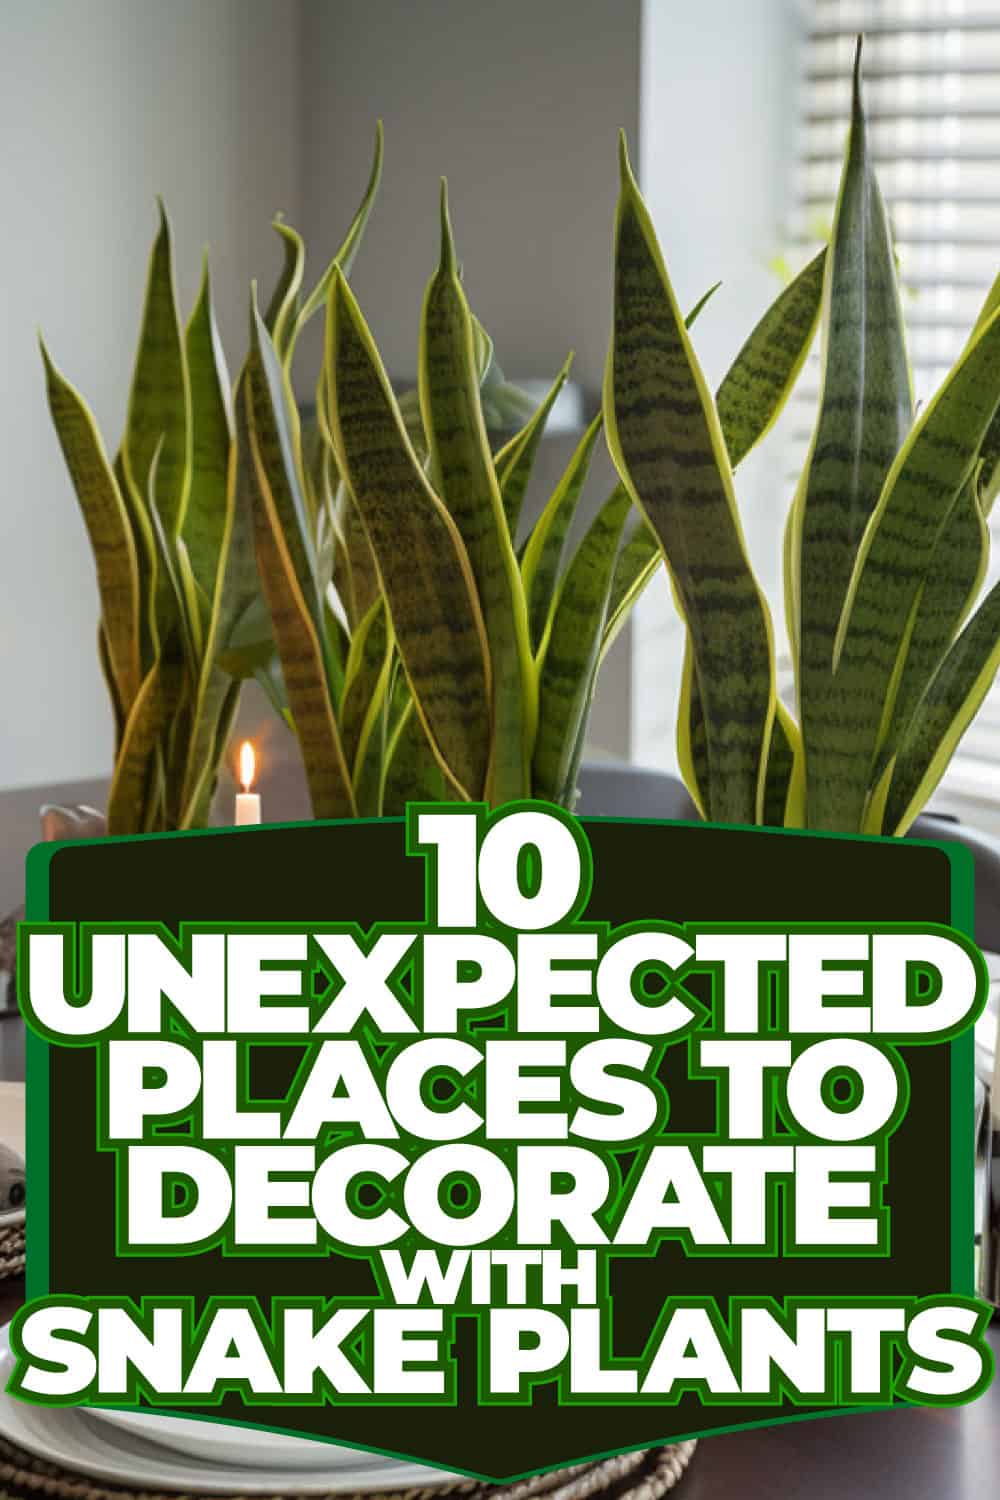 10 Unexpected Places to Decorate with Snake Plants